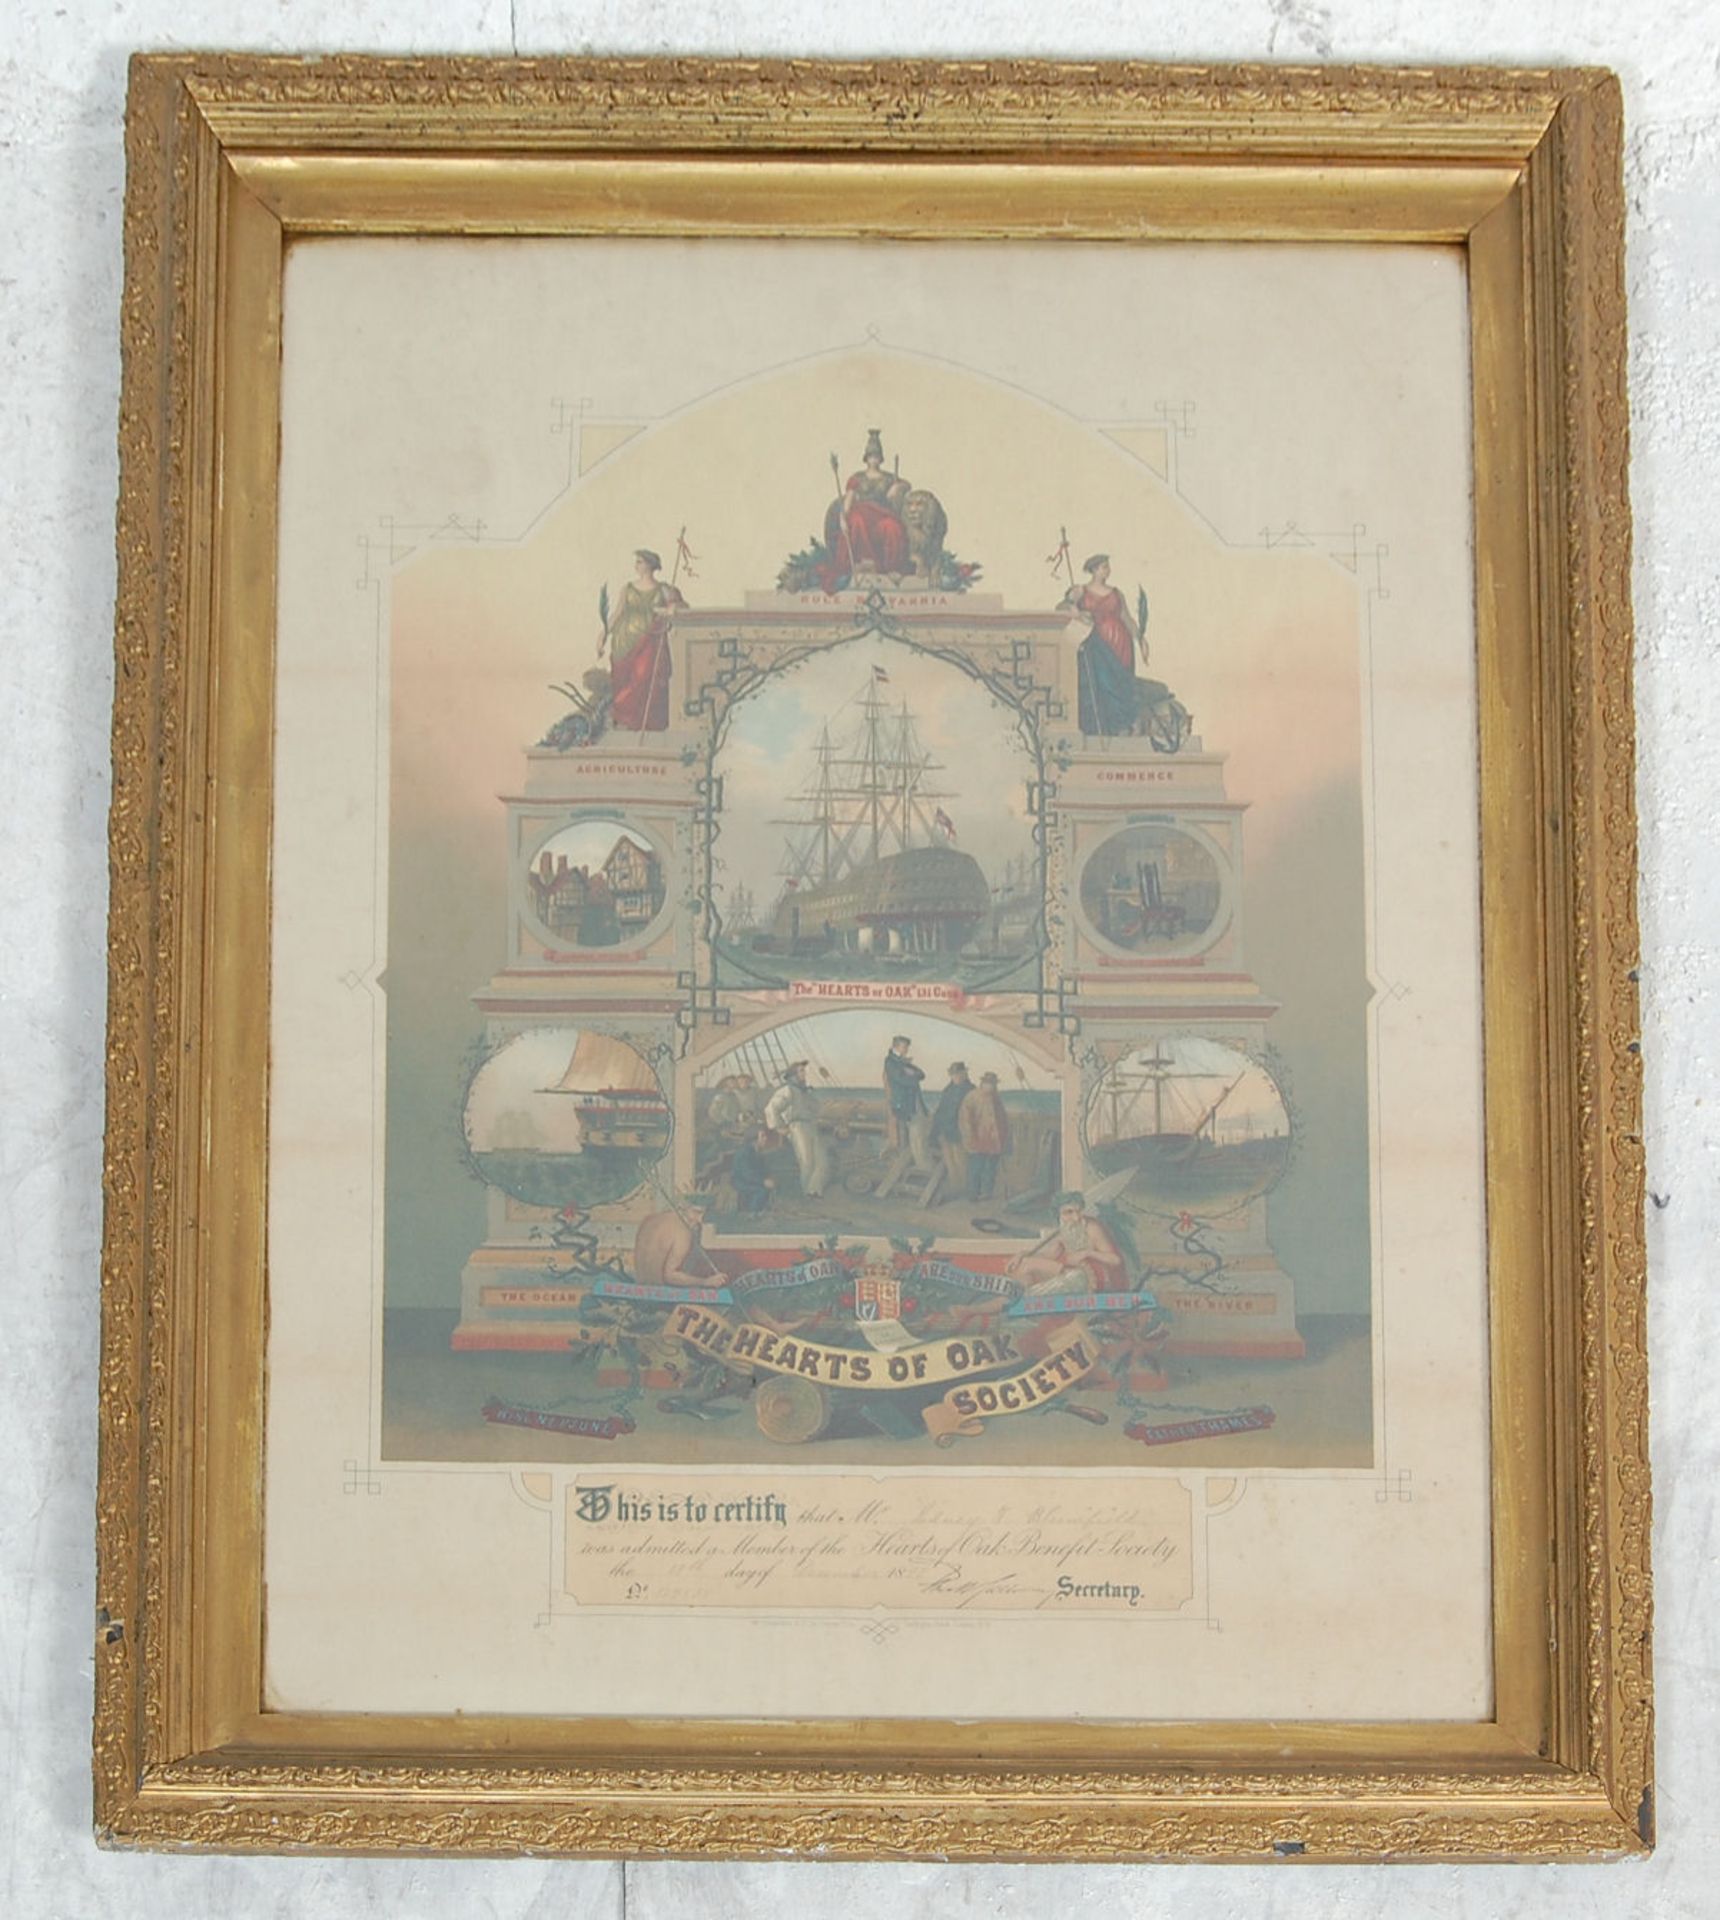 A VICTORIAN FRAMED PICTORIAL CERTIFICATE FOR THE HEART OF OAK SOCIETY